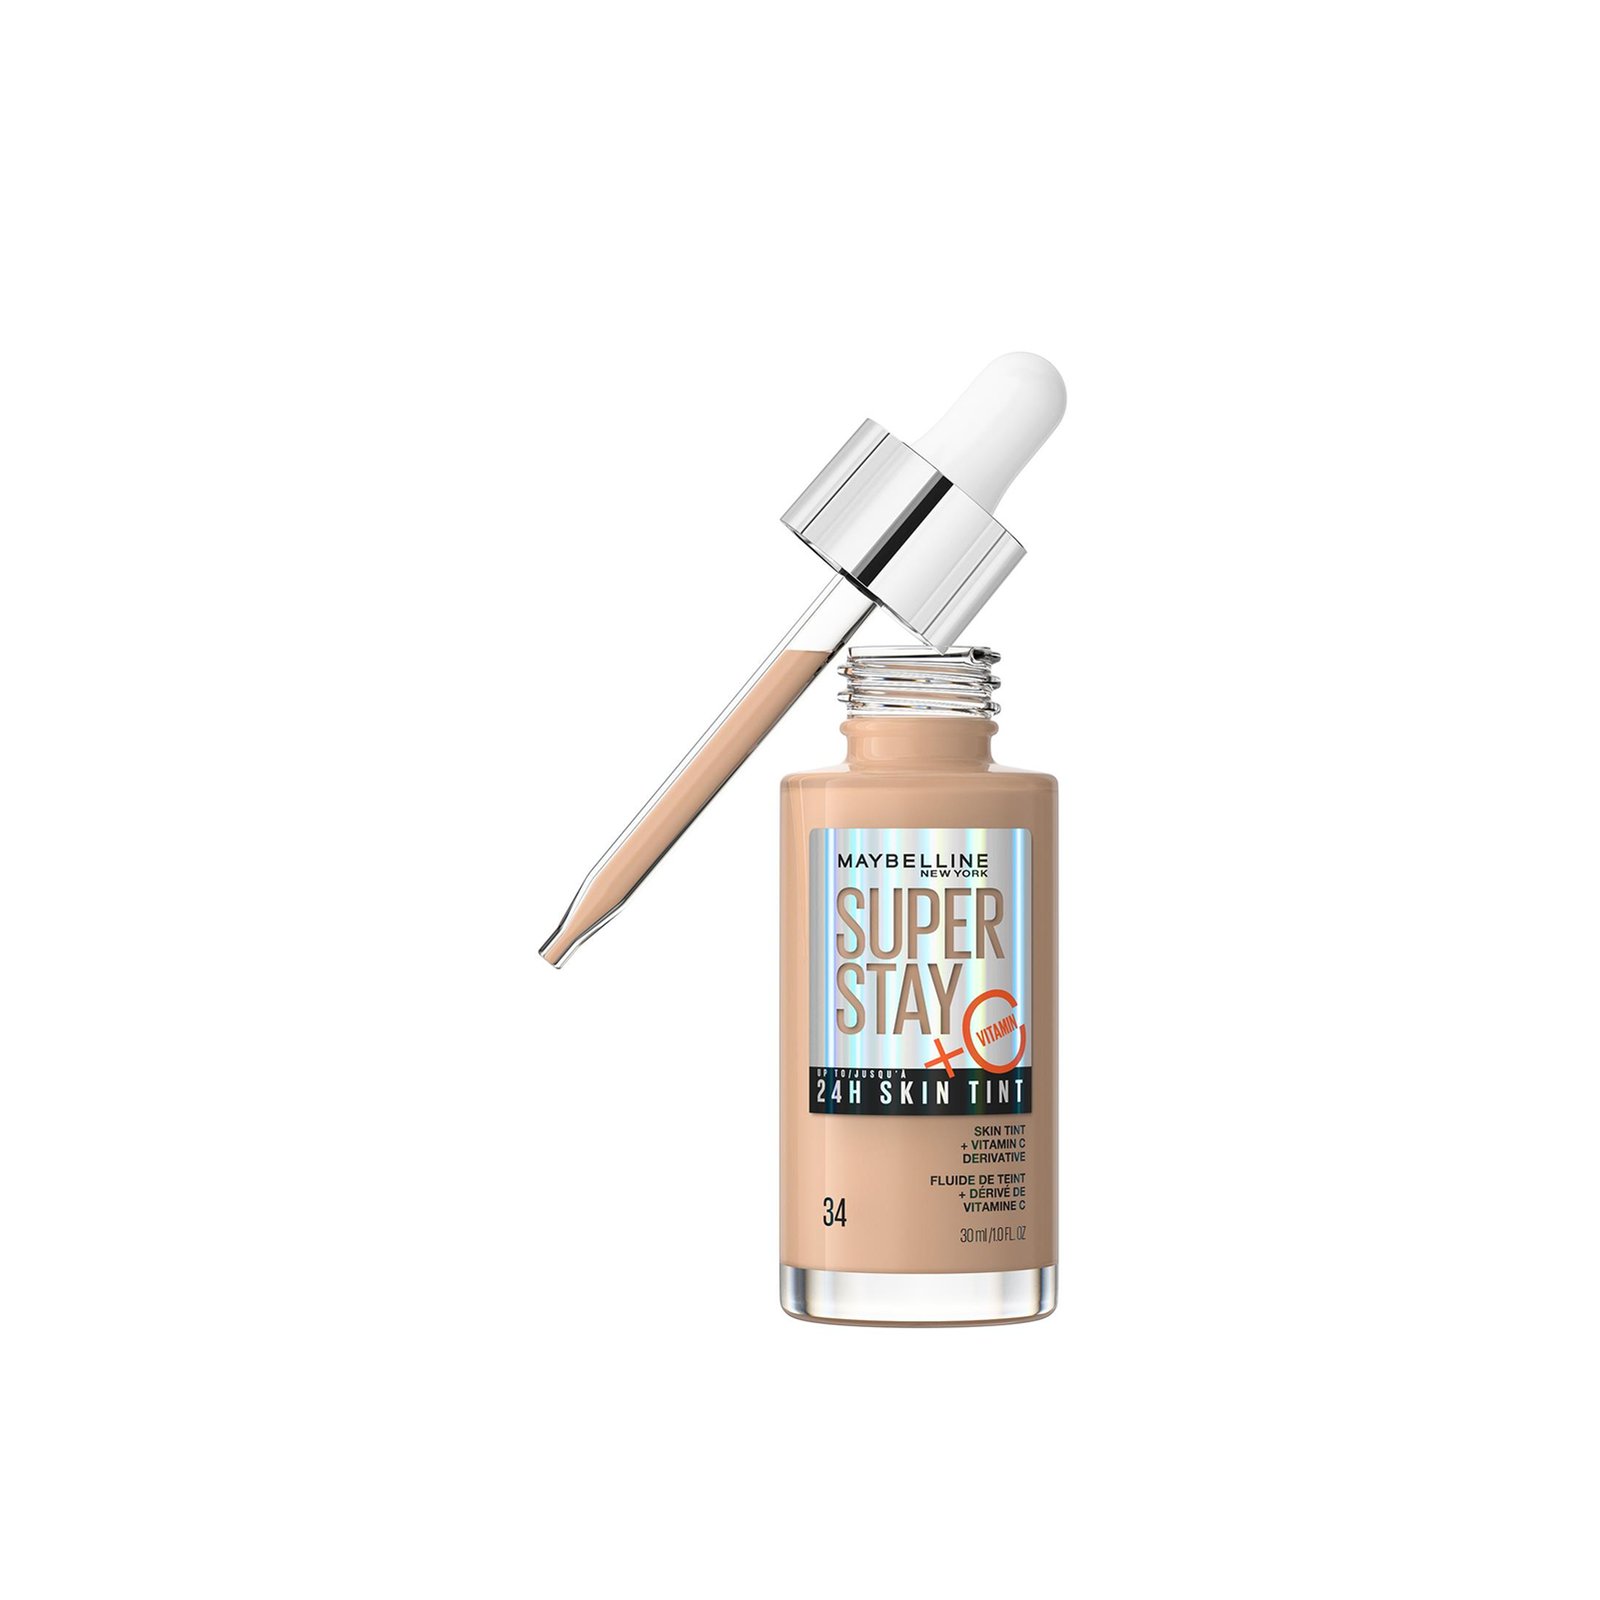 MAYBELLINE Super Stay 24H Full Coverage Liquid Foundation 30ml *CHOOSE  SHADE*